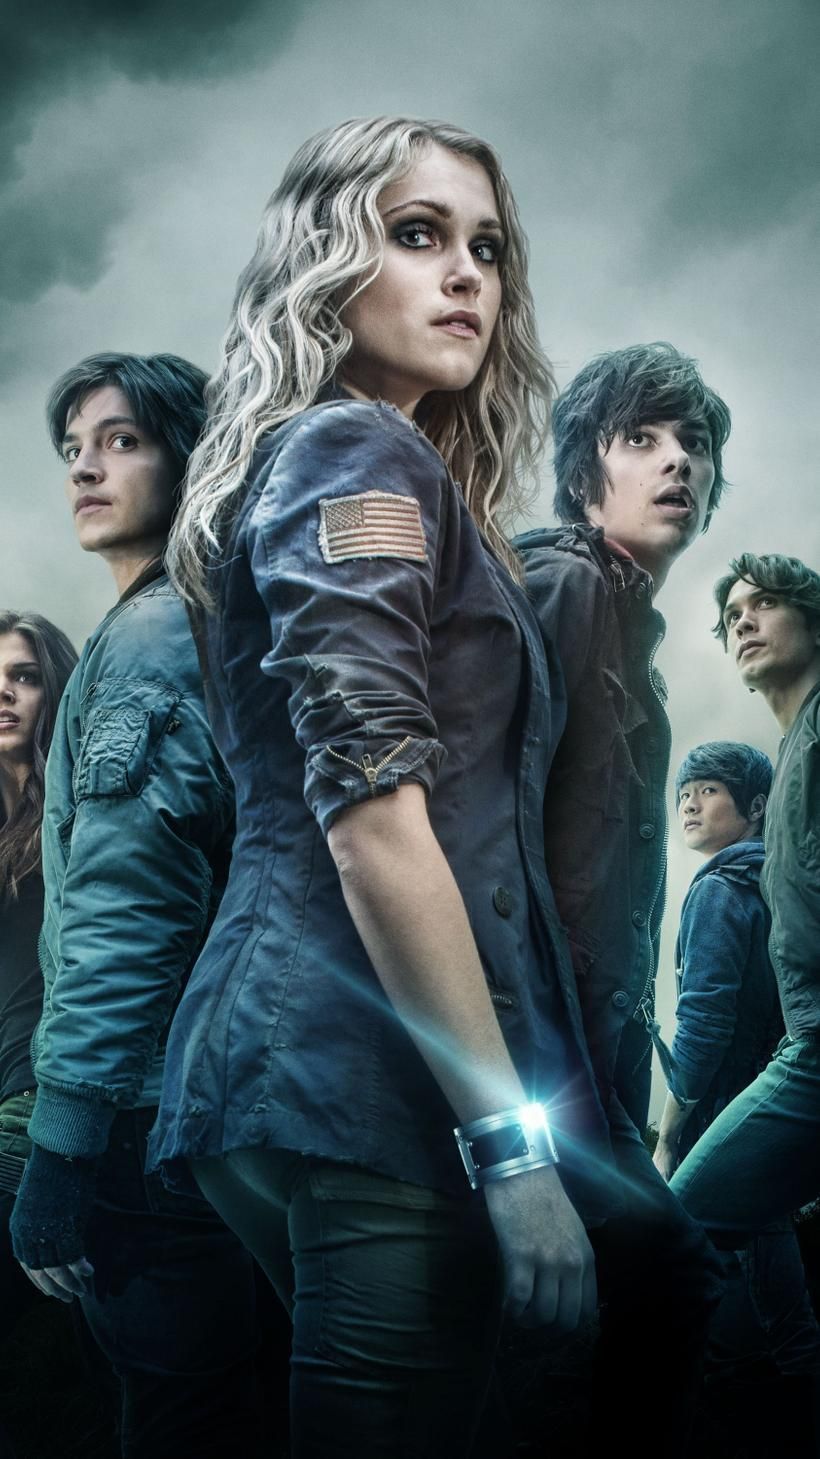 The 100 Show Poster Wallpapers